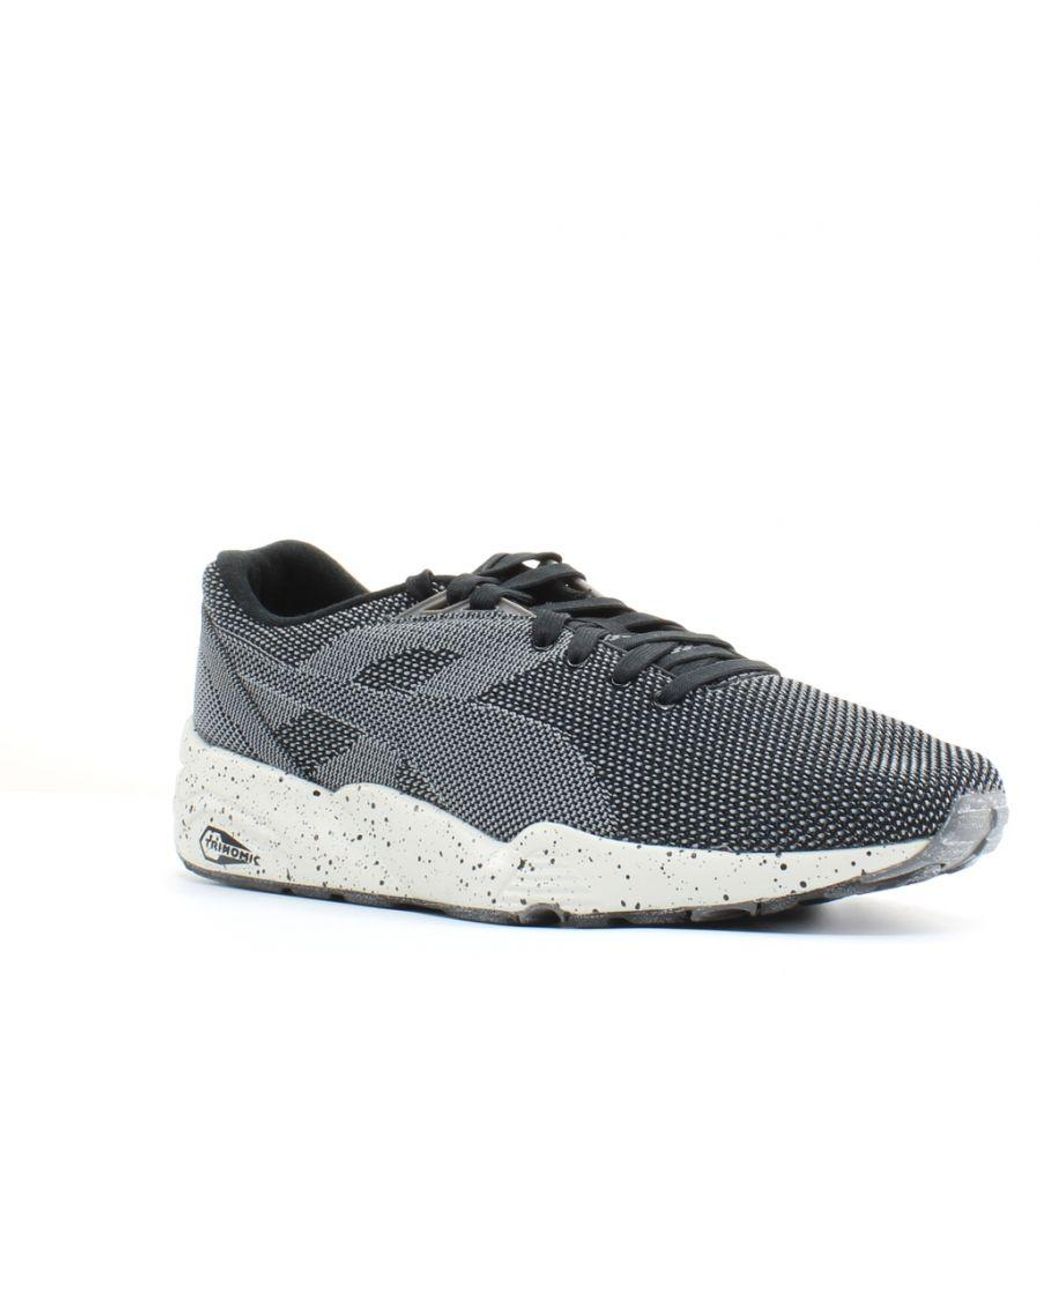 PUMA R698 Knit Mesh V2 Fltrd Black Textile Lace Up Trainers 361659 01 in  Grey for Men | Lyst UK